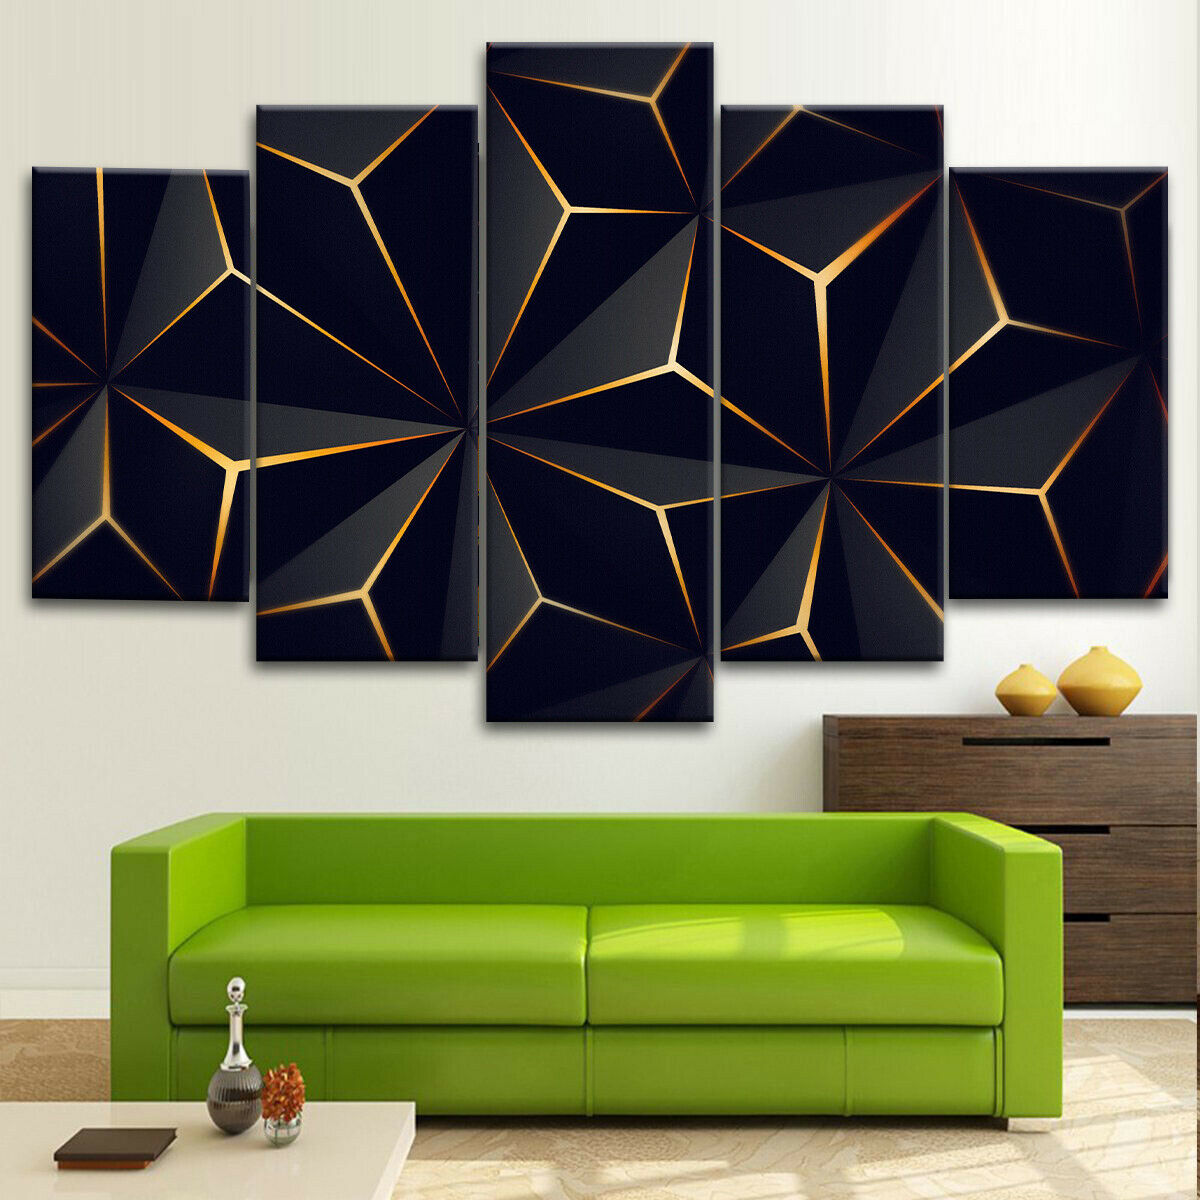 Abstract Geometric Gold Triangle Wall Art Canvas Decor Printing – CA Go ...